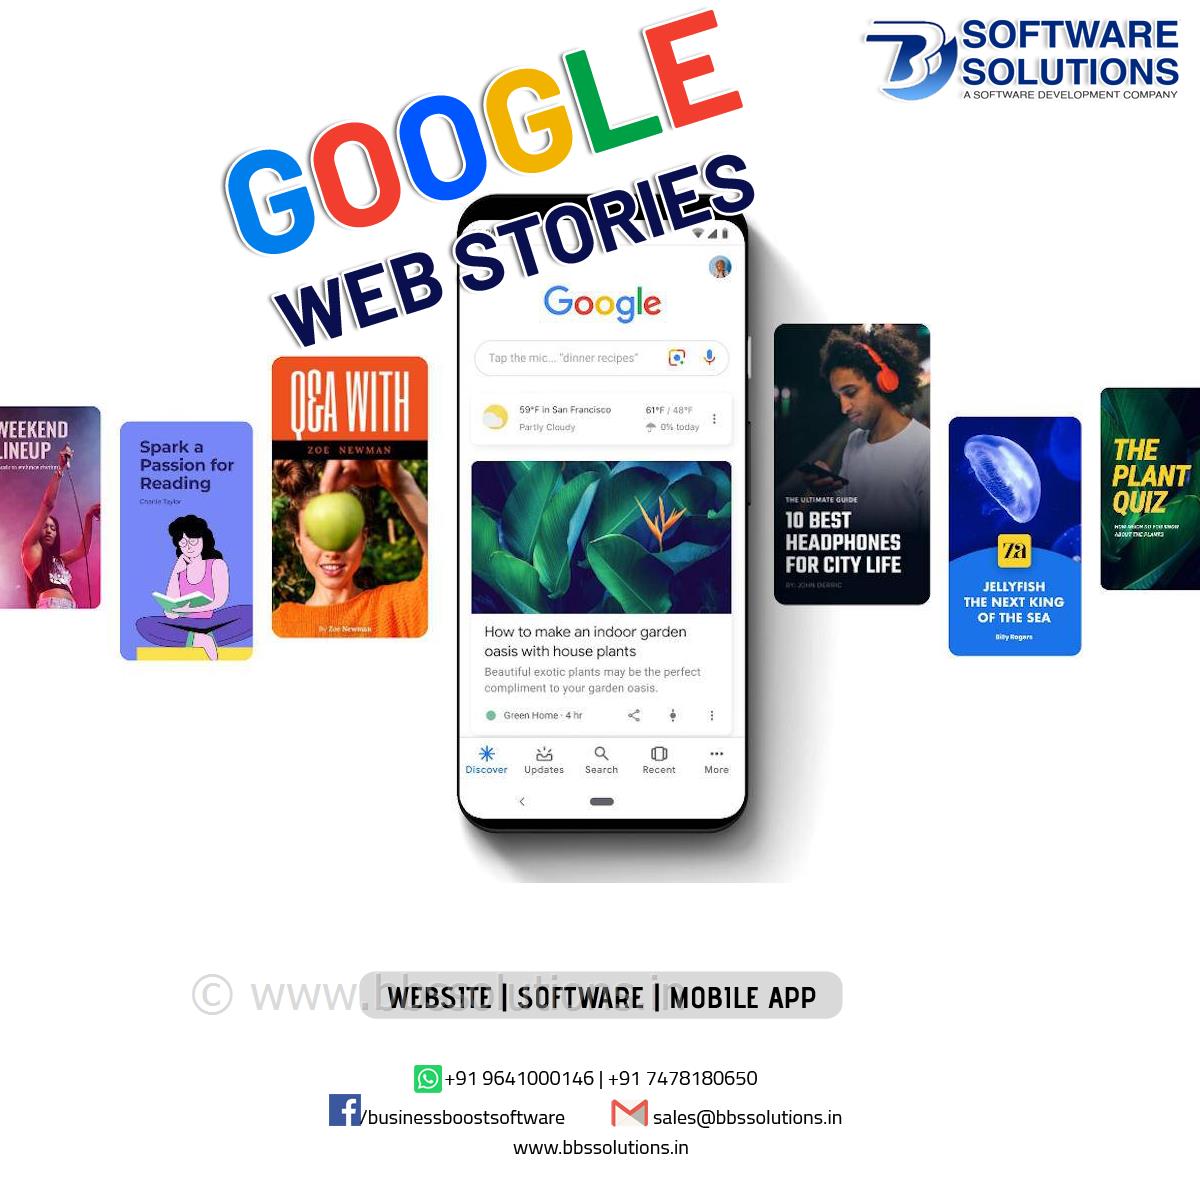 GOOGLE WEB STORIES : HOW TO DYNAMICALLY CREATE MULTIPLE GOOGLE WEB STORIES #2  , Business Boost Software Solutions do Best Software ,Web Development,Mobile App solutions provider in siliguri , india, WestBengal , Assam , Siliguri , Jalpaiguri ,Dhupguri,
    Best website designing in Siliguri with affordable packages and quick support. Get effective website design in Siliguri from best website designers. #bbssolutions , #SEO  , #DigitalMarketing  , #WebDesign  , #SoftwareDevelopment  , #FacebookAds  , #GoogleAds  , #GoogleSEO  , #WebsiteDesigning 
     , #Software  , #website  , #BusinessBoostSoftwareSolutions  , bbssolutions,SEO, Digital Marketing, WebDesign, Software Development, Facebook Ads, Google Ads, Google SEO, Website Designing, 
    Software, website, Business Boost Software Solutions, 9641000146,7478180650,best GST software in West bengal,Best GST software company in north bengal,GST solution in west bengal
    ,gst solutions in north bengal,best customize software in siliguri , india,best customize software in west bengal,best customize software in dhupguri,news portal website in west bengal
    ,news portal website in siliguri , india,regional news portal website in siliguri , india,school software in west bengal,school software in north bengal,school website in north bengal,
    school software in north bengal,android app, ios app, ecommerce website, ecommerce software,Web designing, website designing, ecommerce website, how to make website, create website, 
    website development company, web page design, seo, search engine optimization, seo siliguri , india , 
    seo company, best seo company, seo services, responsive web design, web designing companies, 
    how to create a website, internet marketing, digital marketing, online marketing, social media marketing, 
    promotion,web designing in Siliguri,web designing in Siliguri siliguri , india,web designing in siliguri , india,GST Software  ,  GST Billing Software  ,  GST Accounting  ,  GST Ready Software,
    software company in siliguri,software company in siliguri siliguri , india,software company in north east siliguri , india,
    school software in siliguri,school software in north east siliguri , india,customize software,free software demo,
    reasonable price software,cost effective software,resonable price software,free demo software,free software,best software support,free software support,best software company in siliguri , india,
    best software company in siliguri,MLM Software company in Siliguri,Binary Software company in Siliguri,
    top ten software company in north bengal,top ten software company in siliguri,top ten software company in siliguri , india,
    top ten software company in north east,software development siliguri , india,west bengal,kolkata,siliguri , software company in siliguri , india
     , software development west bengal , Customized software siliguri , india , software for hotel,medicine distributors,
    jewellery shop , best software company in siliguri,jalpaiguri,sikkim,darjeeling  , Business Boost Softwate Solutions  ,  
    Web designing company in siliguri  ,  ecommerce designing company in siliguri  ,  web development company in siliguri  ,  
    software development comapny in siliguri  ,  software development in sikkim  ,  website designing company in sikkim  ,  
    SEO service in sikkim  ,  web designing company in siliguri  ,  web designing compnay in North Bengal  ,  
    SEO service in siliguri  ,  web designing in north bengal  ,  web designing in north east siliguri , india , website designing in siliguri, best website designing in siliguri, web design, web designer in siliguri, web designing company siliguri